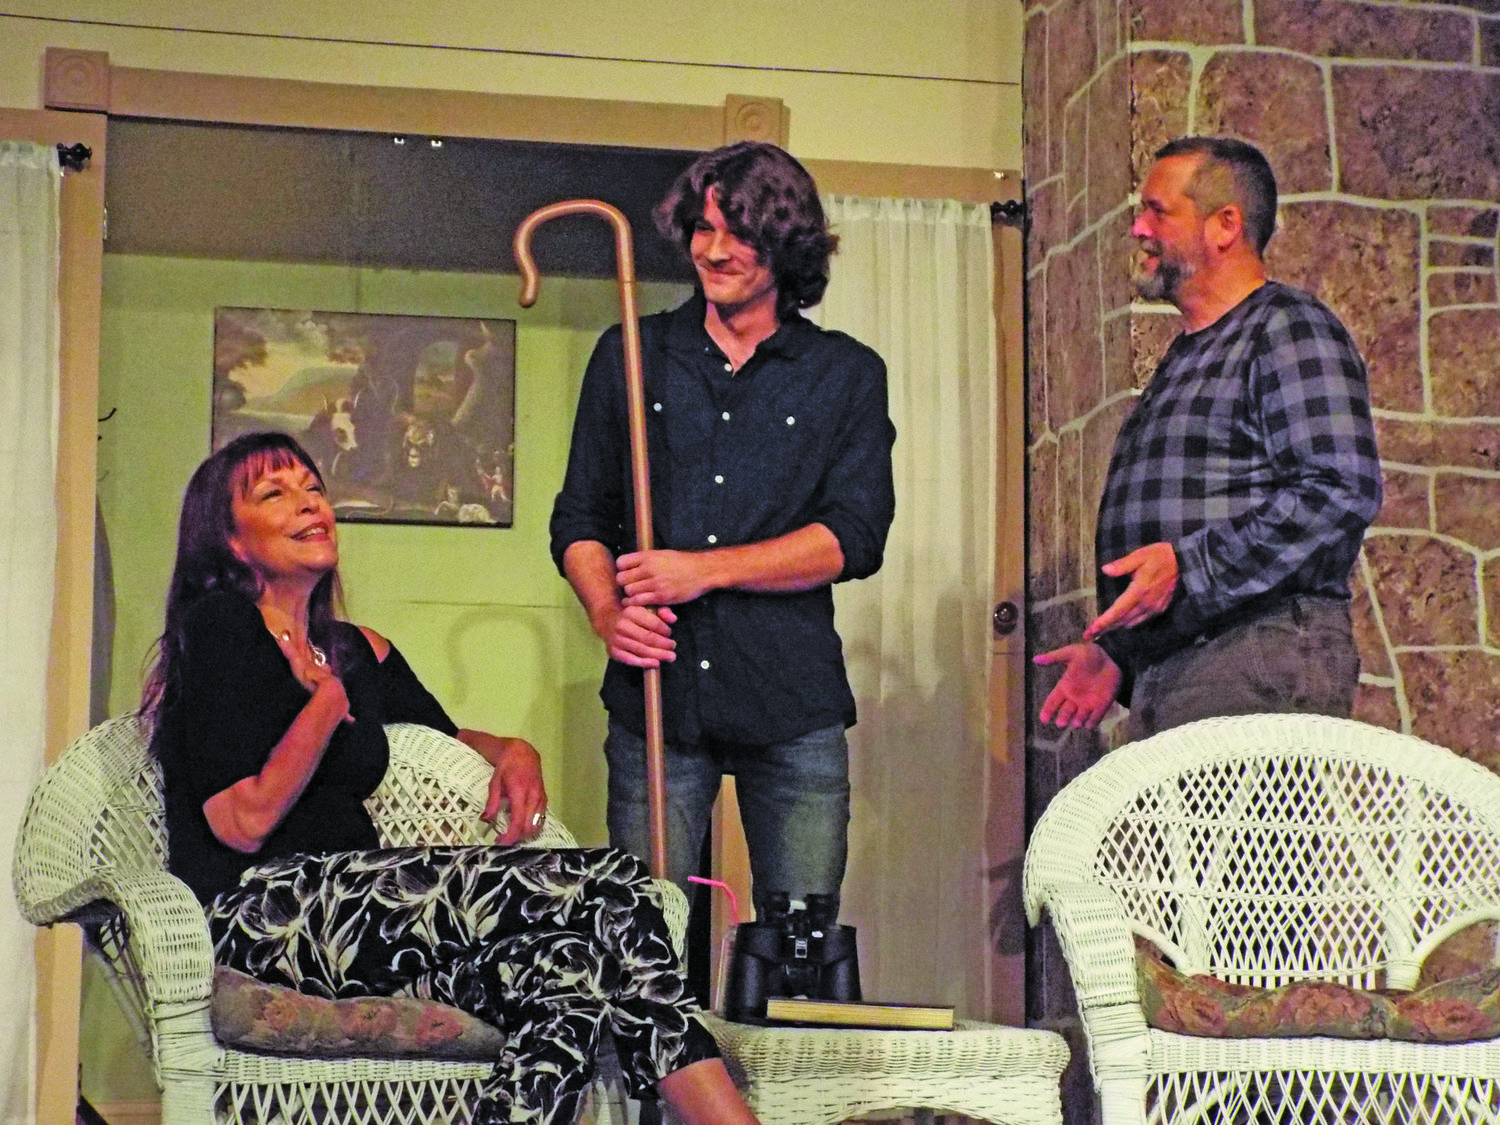 From left are Cathy Liebars as Masha, Michael O’Hara as Spike, and DJ Holcombe as Vanya in the ActorsNet production of Christopher Durang’s “Vanya and Sonia and Masha and Spike.”